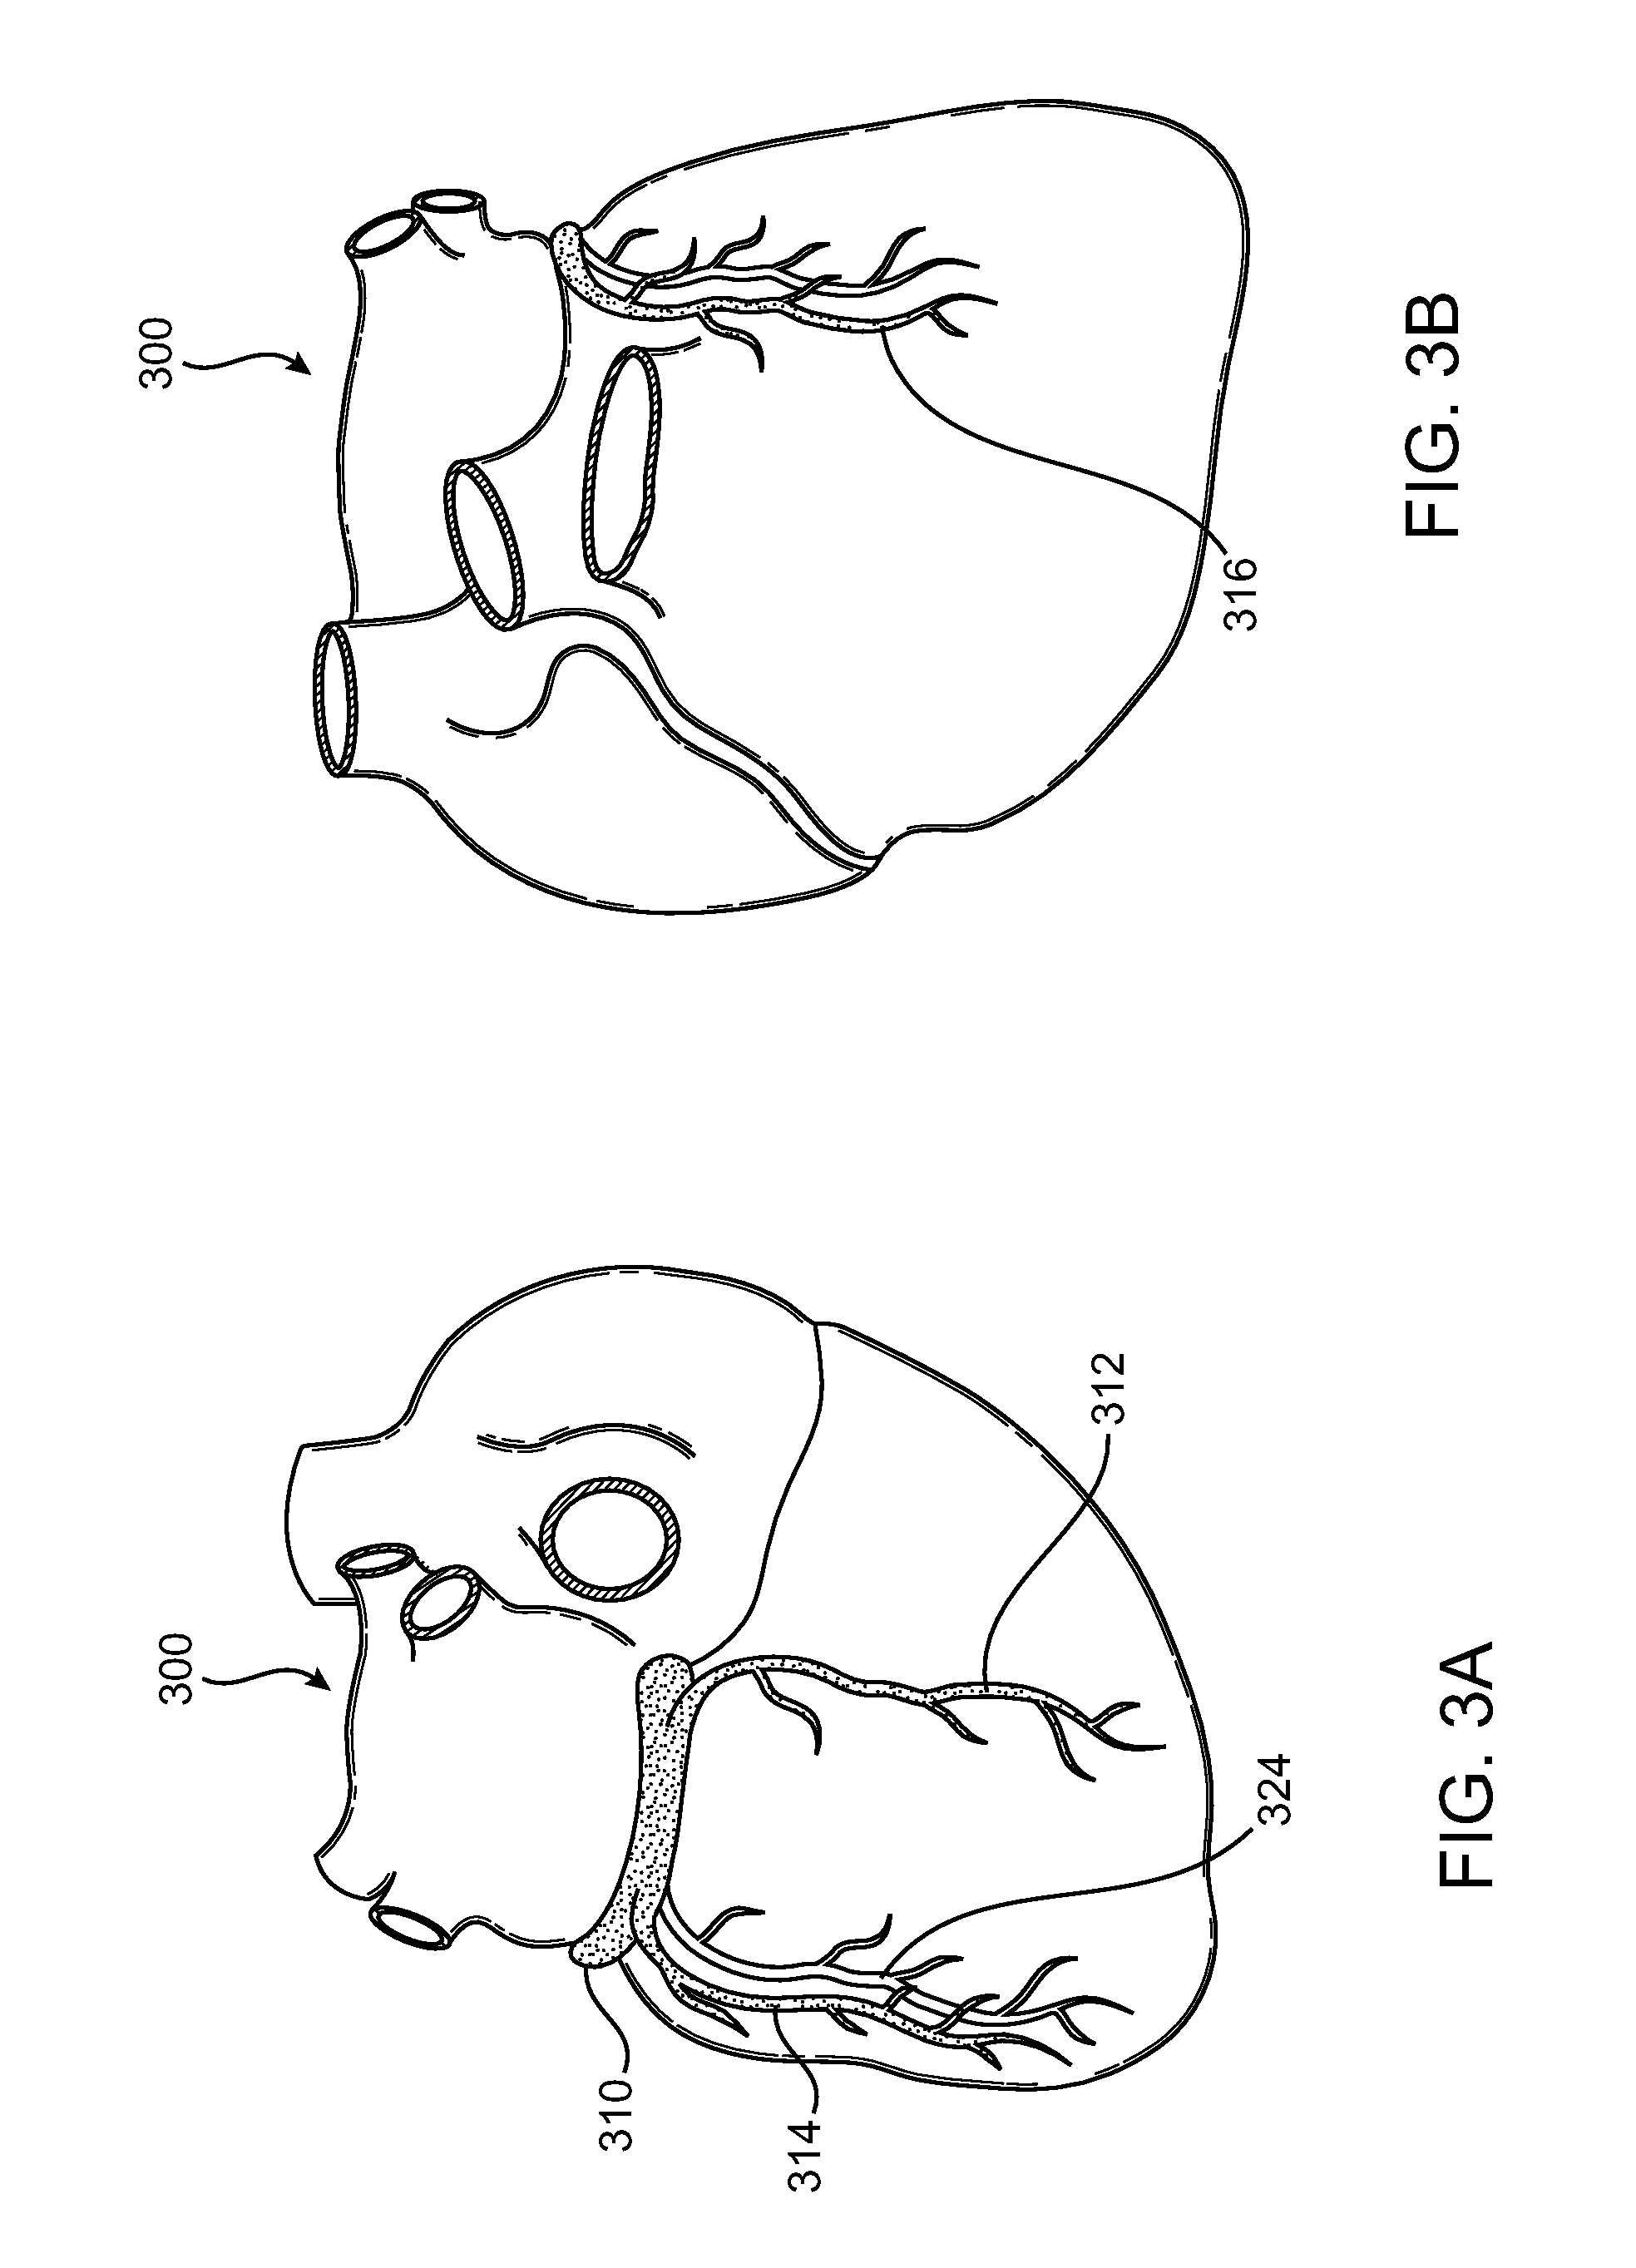 Reference Devices for Placement in Heart Structures for Visualization During Heart Valve Procedures